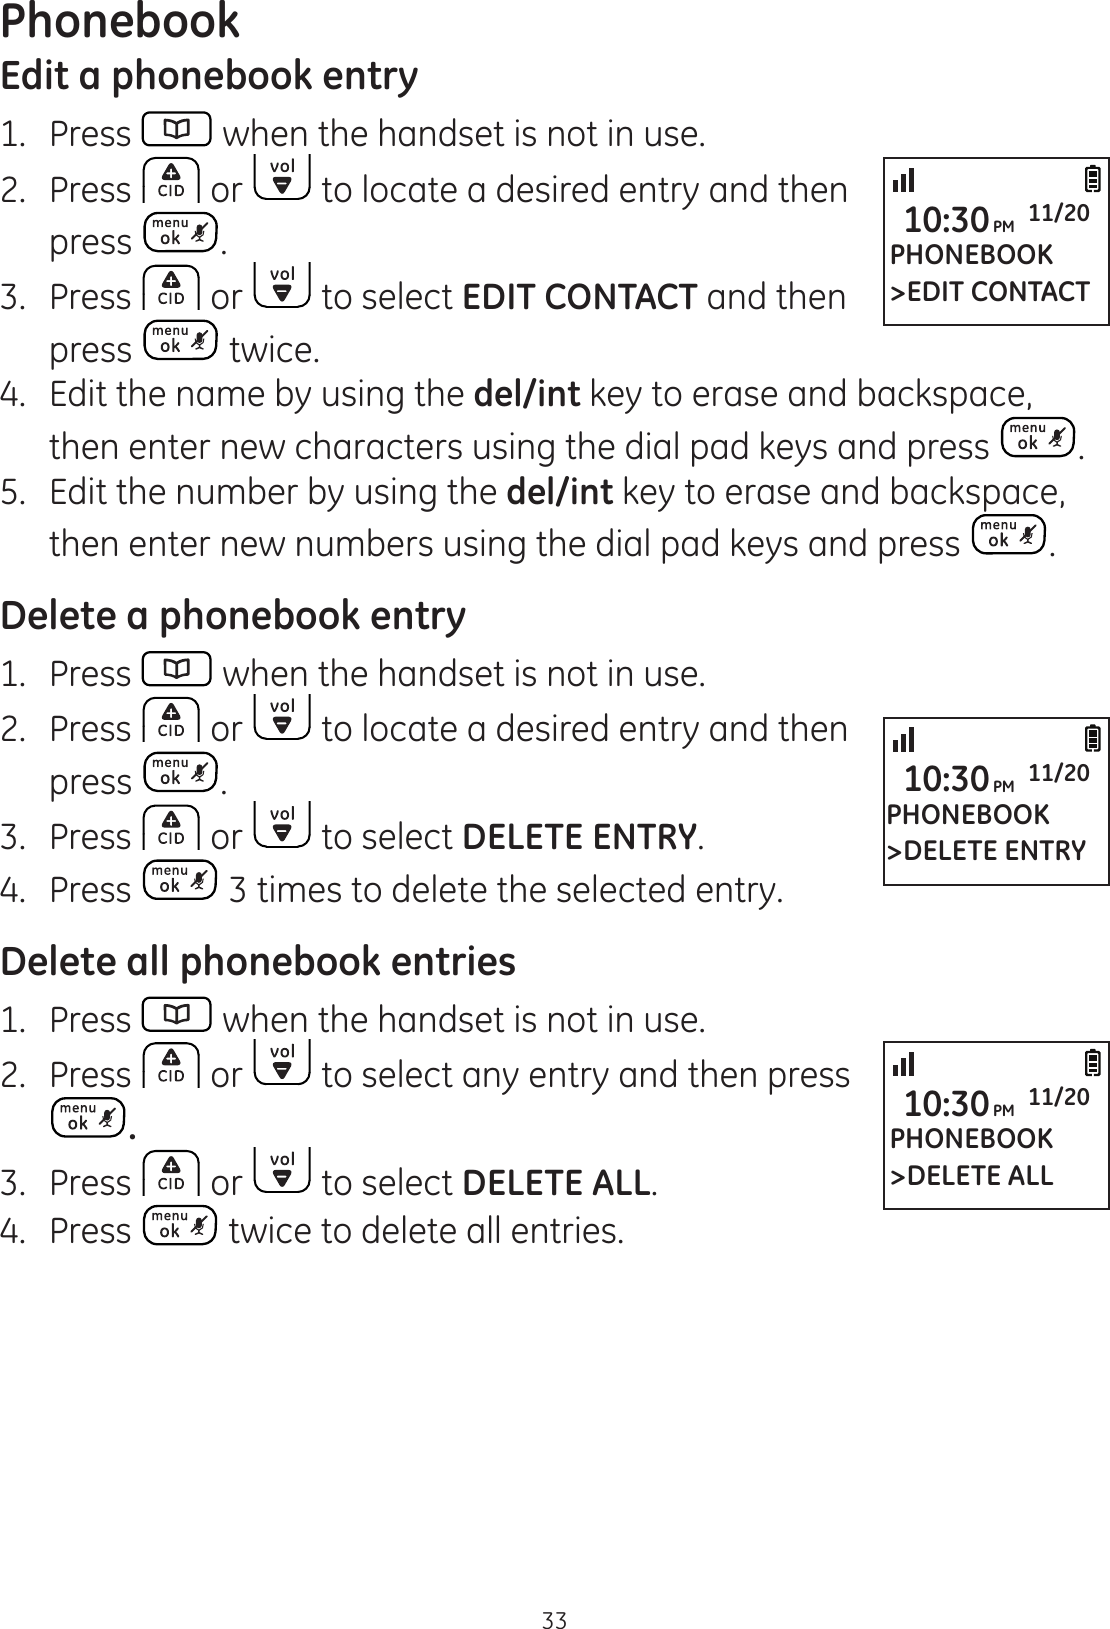 Phonebook33Edit a phonebook entry1.  Press   when the handset is not in use.2.  Press  or   to locate a desired entry and then press  .3.  Press   or   to select EDIT CONTACT and then press   twice.4.  Edit the name by using the del/int key to erase and backspace, then enter new characters using the dial pad keys and press  .5.  Edit the number by using the del/int key to erase and backspace, then enter new numbers using the dial pad keys and press  .Delete a phonebook entry1.  Press   when the handset is not in use.2.  Press   or   to locate a desired entry and then press  .3.  Press   or   to select DELETE ENTRY.4.  Press   3 times to delete the selected entry.Delete all phonebook entries1.  Press   when the handset is not in use.2.  Press   or   to select any entry and then press .3.  Press   or   to select DELETE ALL.4.  Press   twice to delete all entries.PHONEBOOK&gt;EDIT CONTACT10:30PM 11/20PHONEBOOK&gt;DELETE ENTRY10:30PM 11/20PHONEBOOK&gt;DELETE ALL10:30PM 11/20